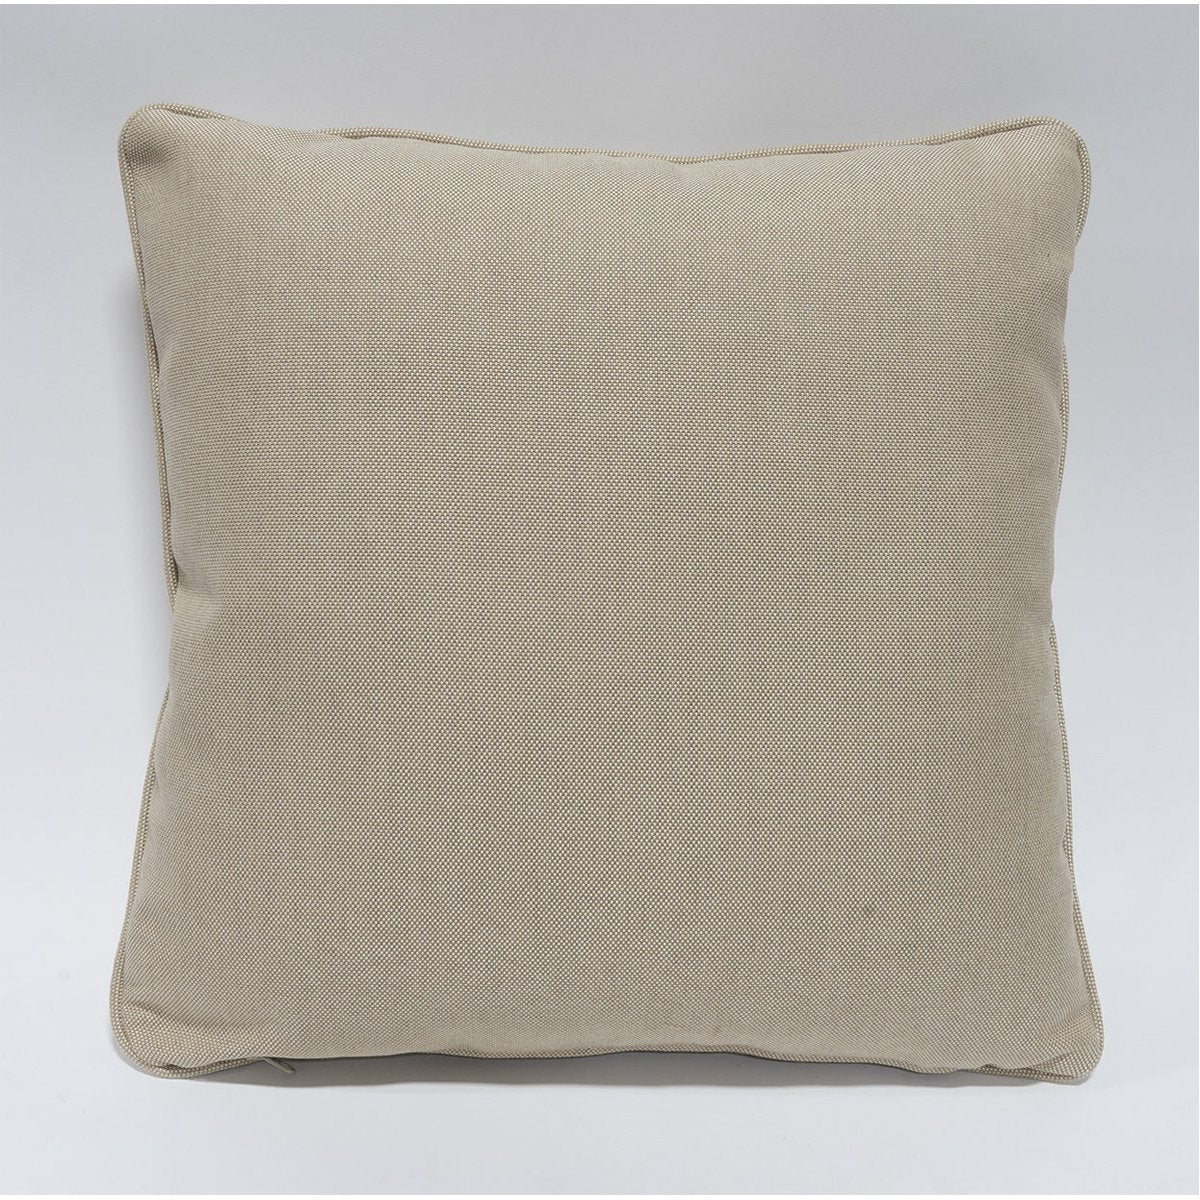 Palecek 20" Square Outdoor Pillow with Welt